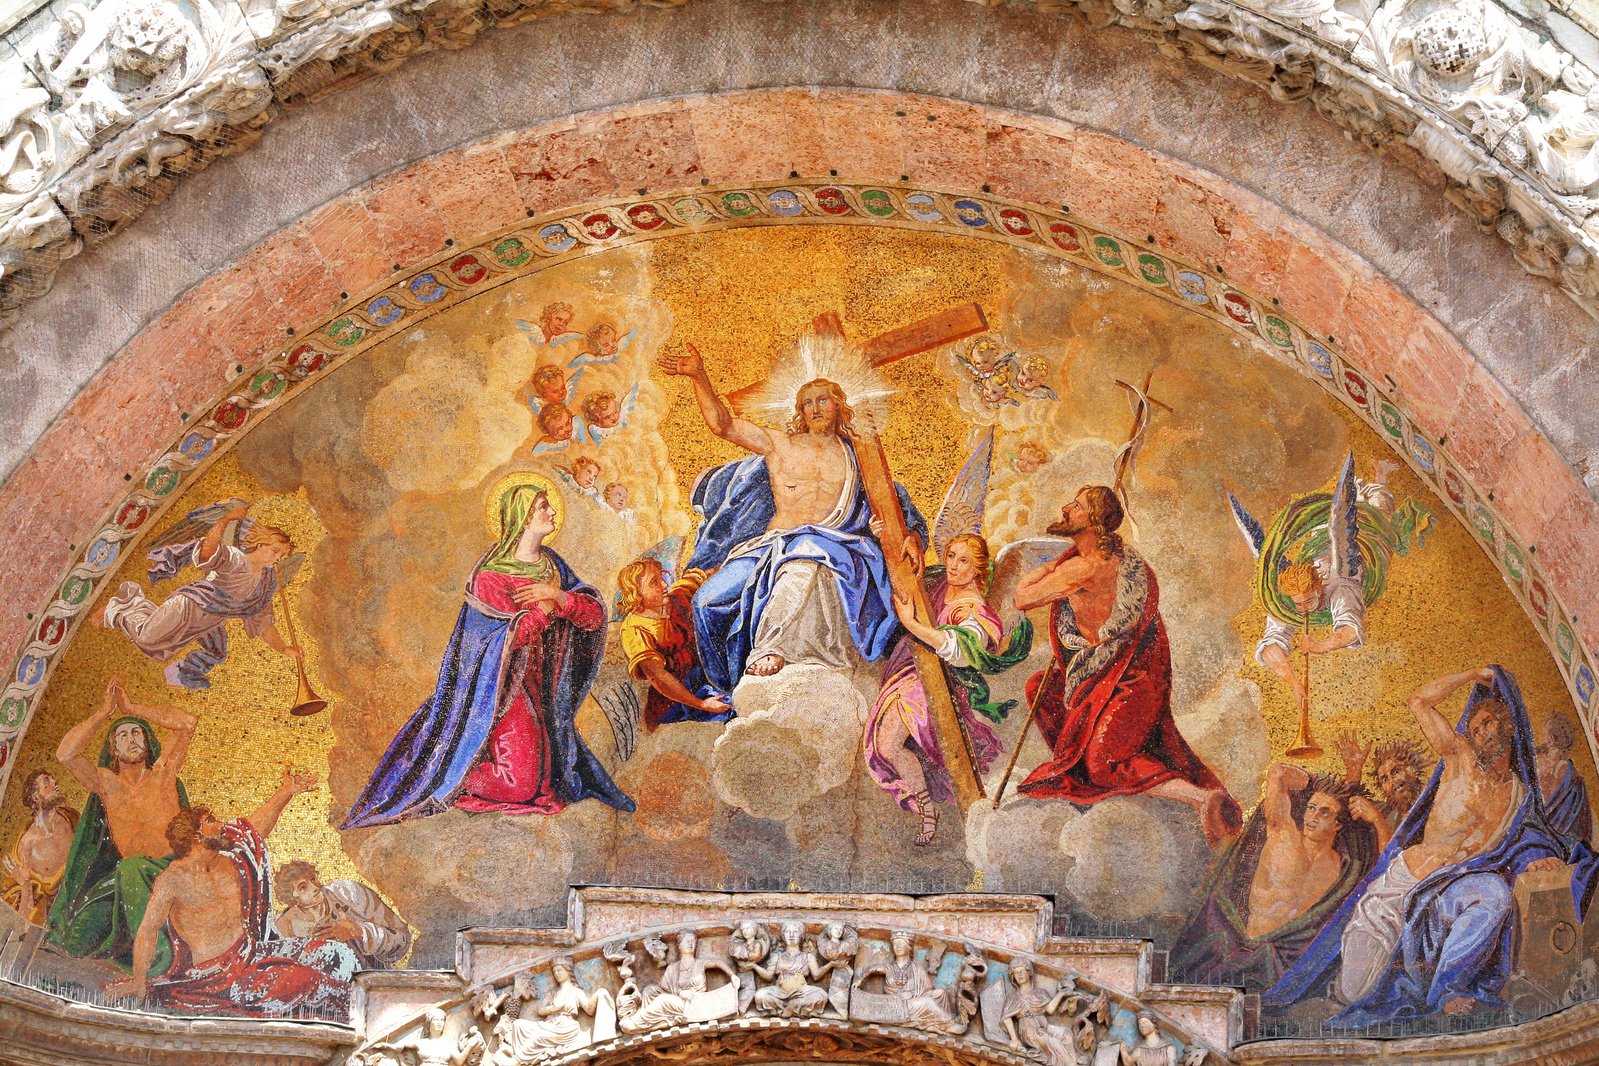 the ornate art on the wall shows many religious figures